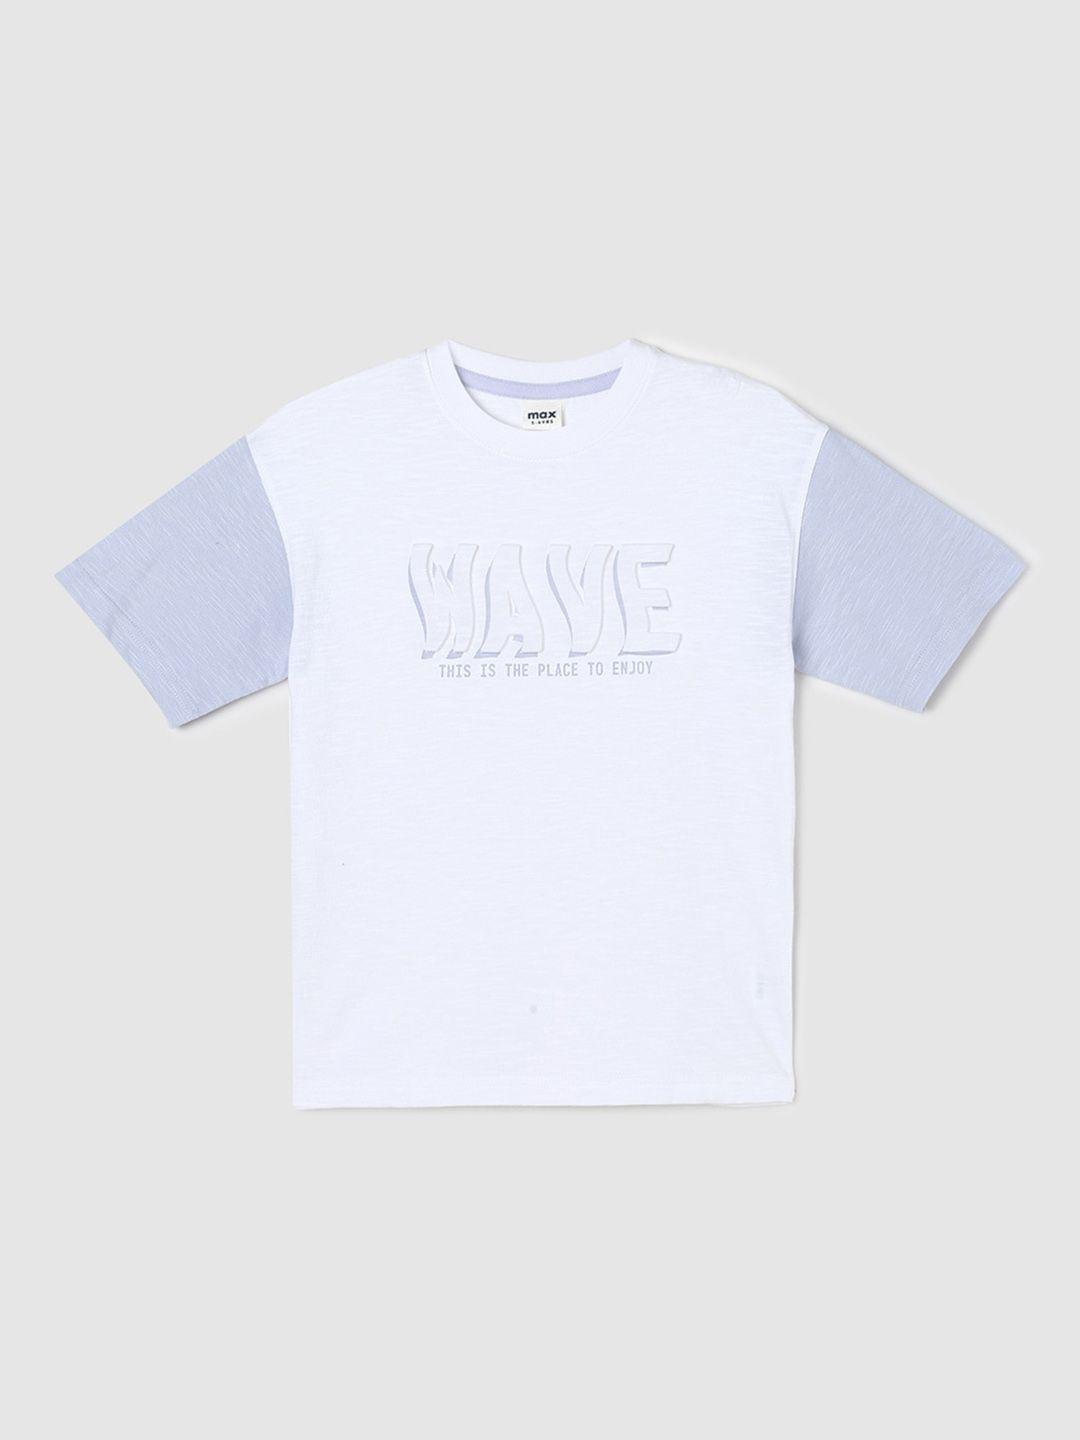 max boys typography printed pure cotton t-shirt